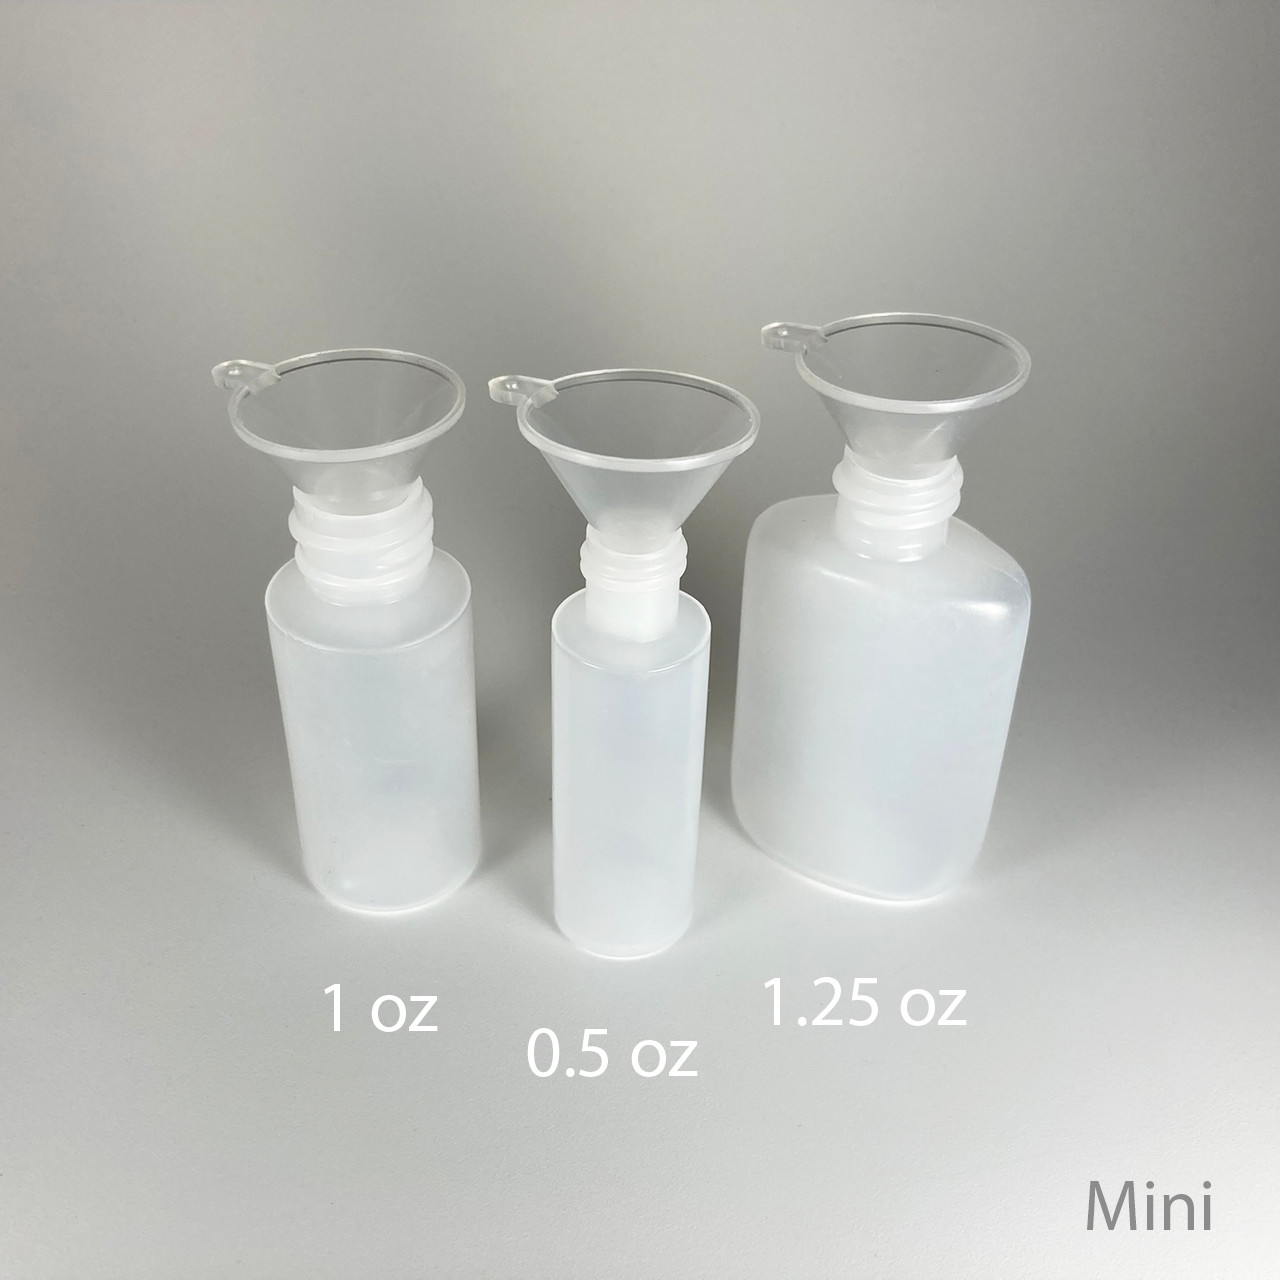 Delove Mini Clear Plastic Funnel,Little Small Funnel Set for Lab  Bottles,Sand Art, Essential Oils,Perfumes,Spices, Powder,11-Pack